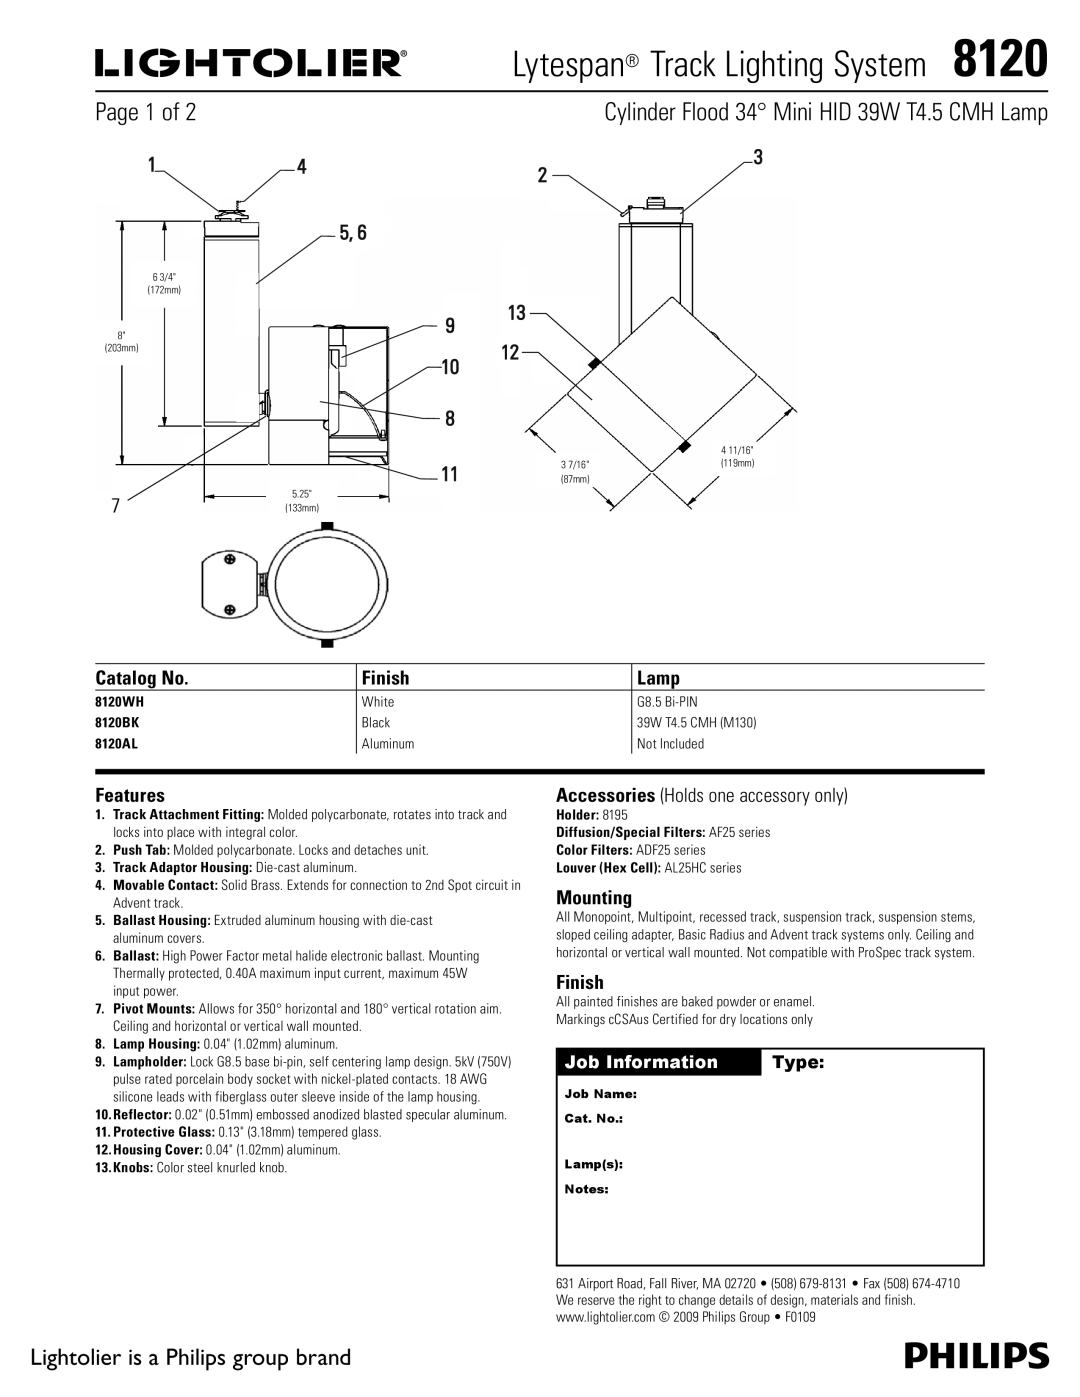 Lightolier 8120 manual Cylinder Flood 34 Mini HID 39W T4.5 CMH Lamp, Page 1 of, Lightolier is a Philips group brand, Type 